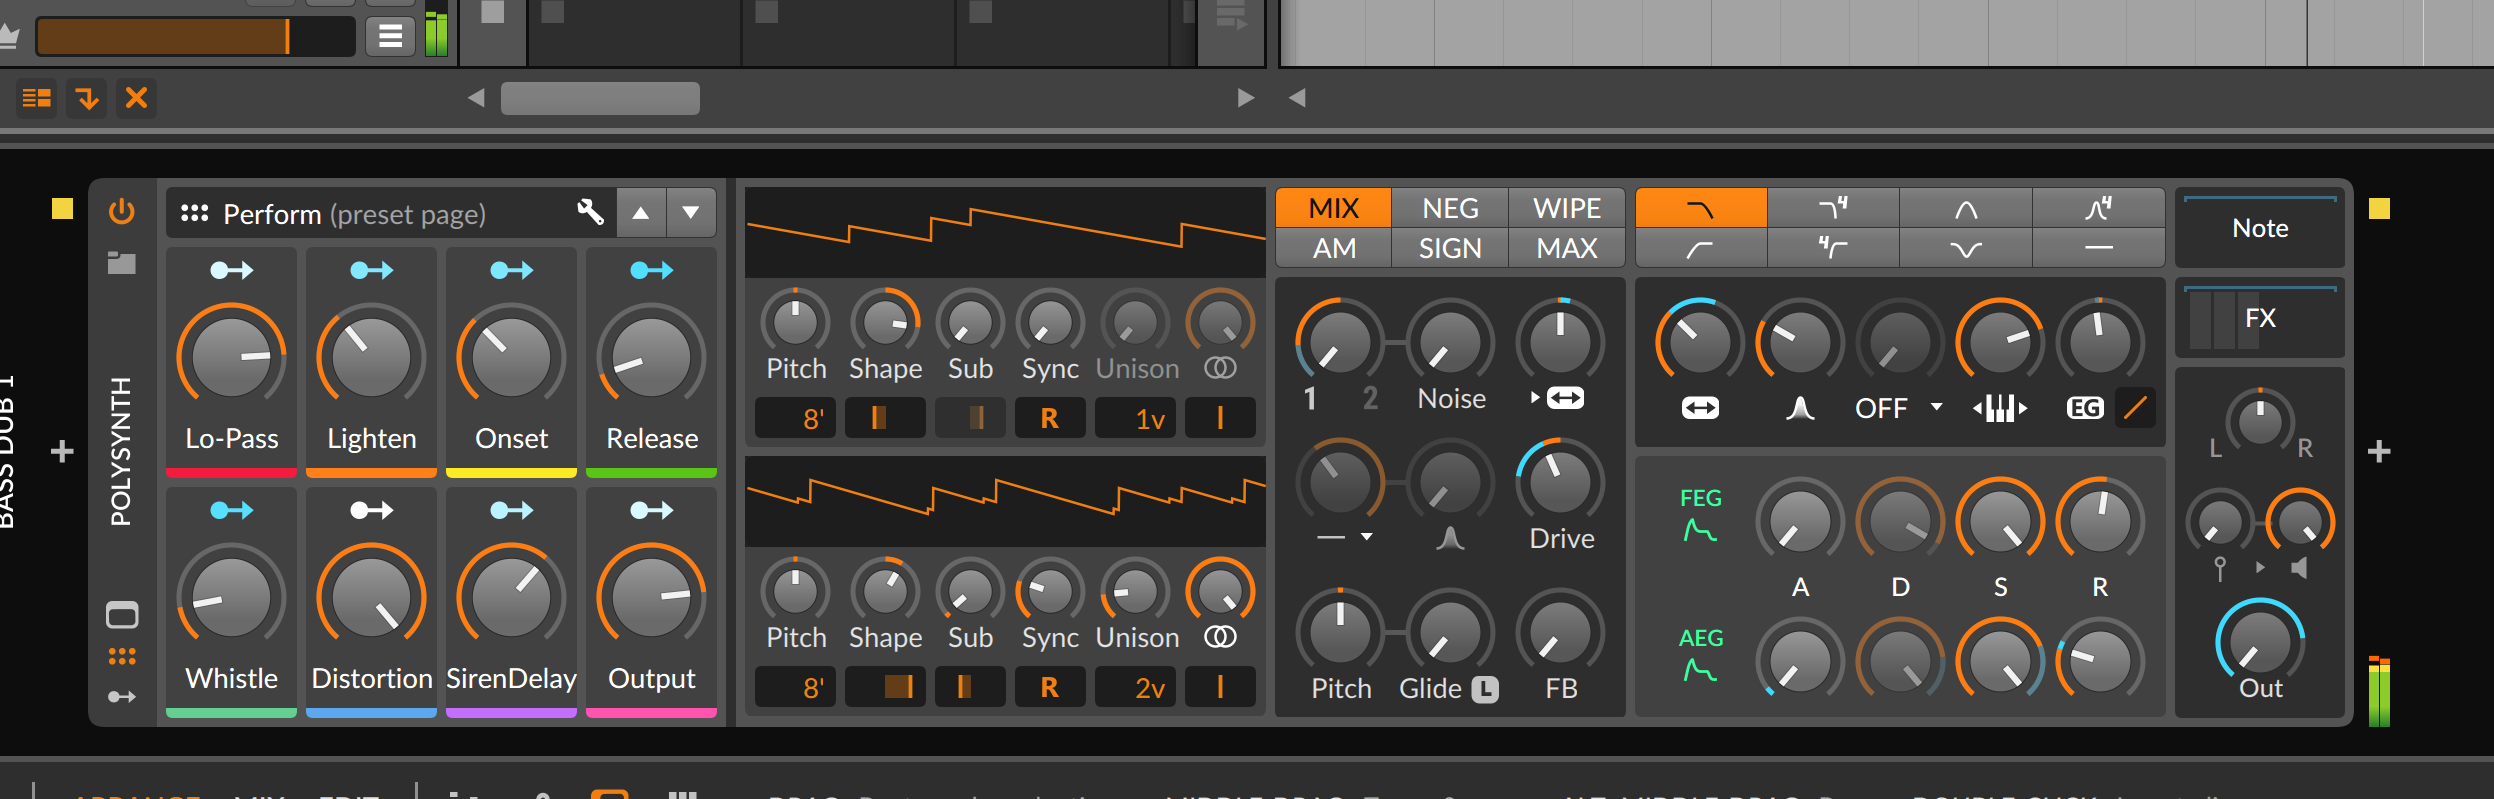 Bitwig Studio (upgrade From 8-track) - Sequencer sofware - Variation 10